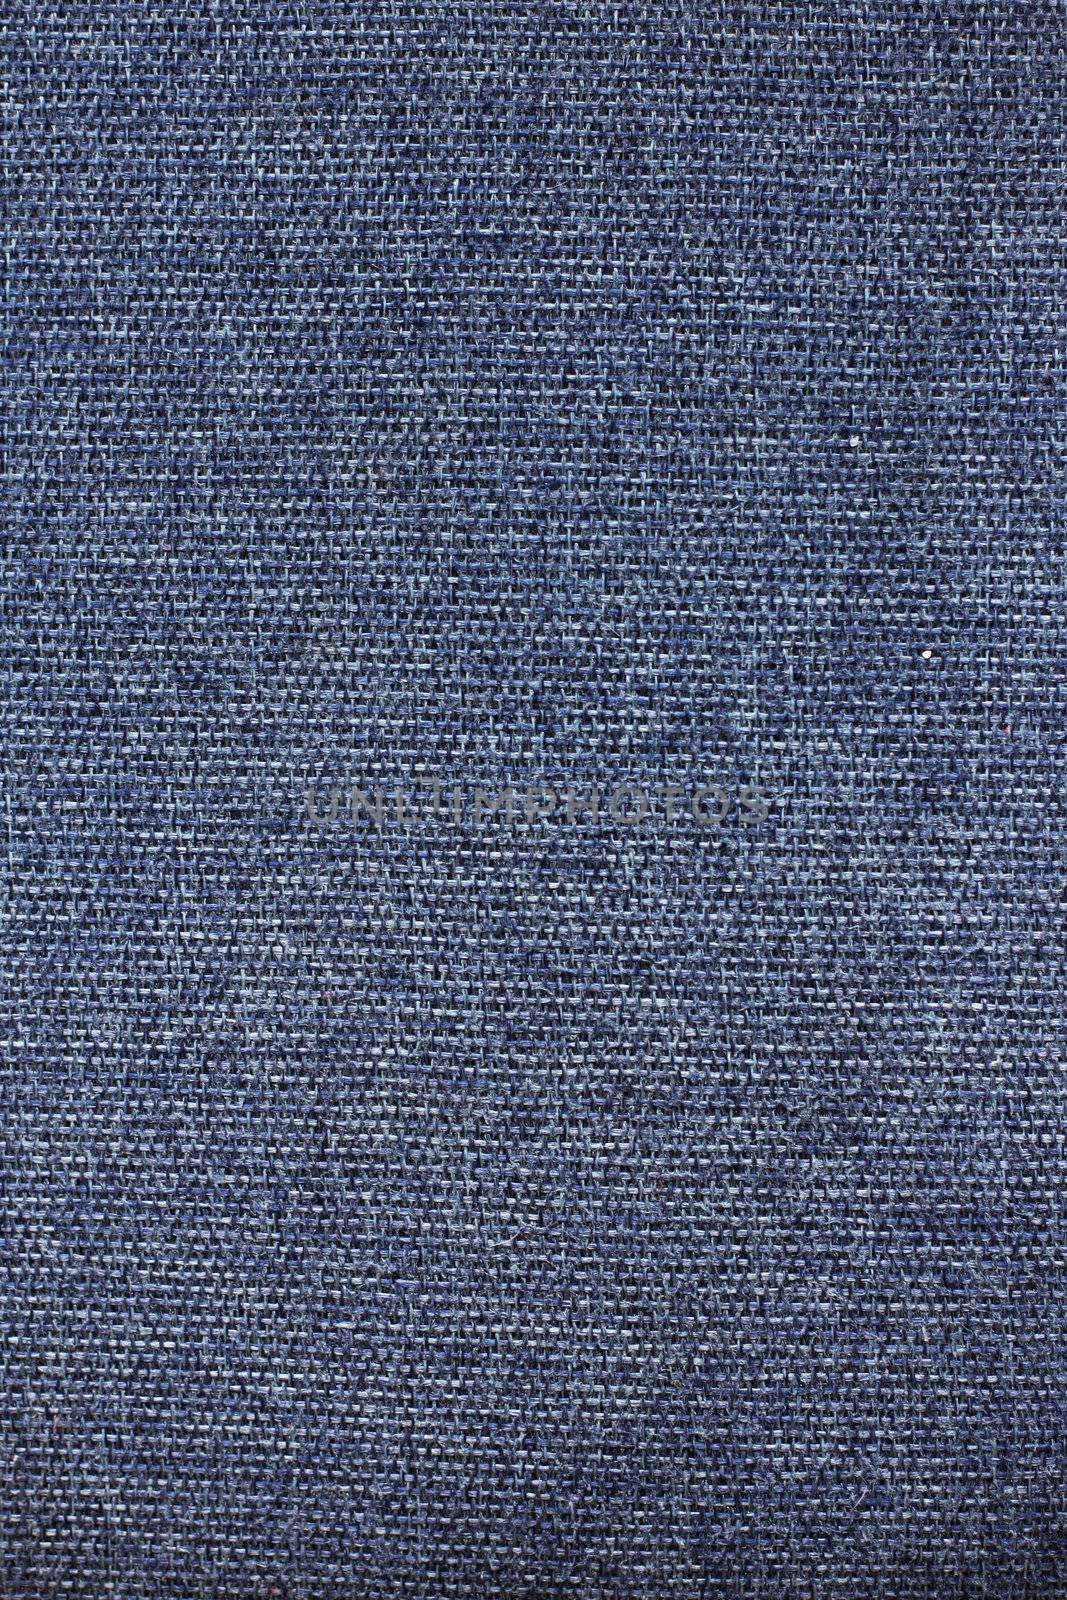 shot of blue fabric nice pattern and texturel, perfect for designs or backgrounds